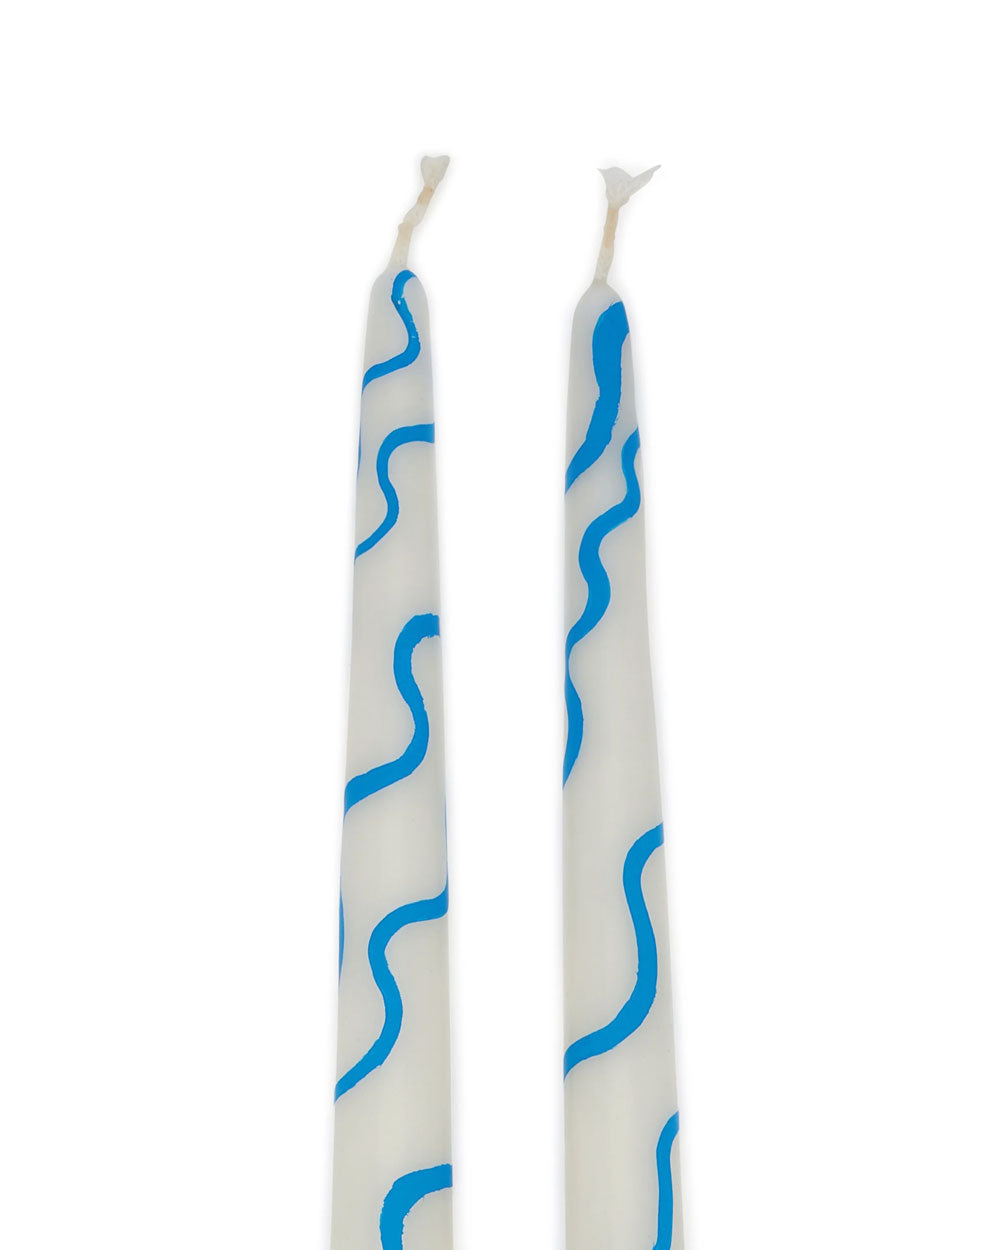 Primary Squiggle Hand Painted Candles in Blue